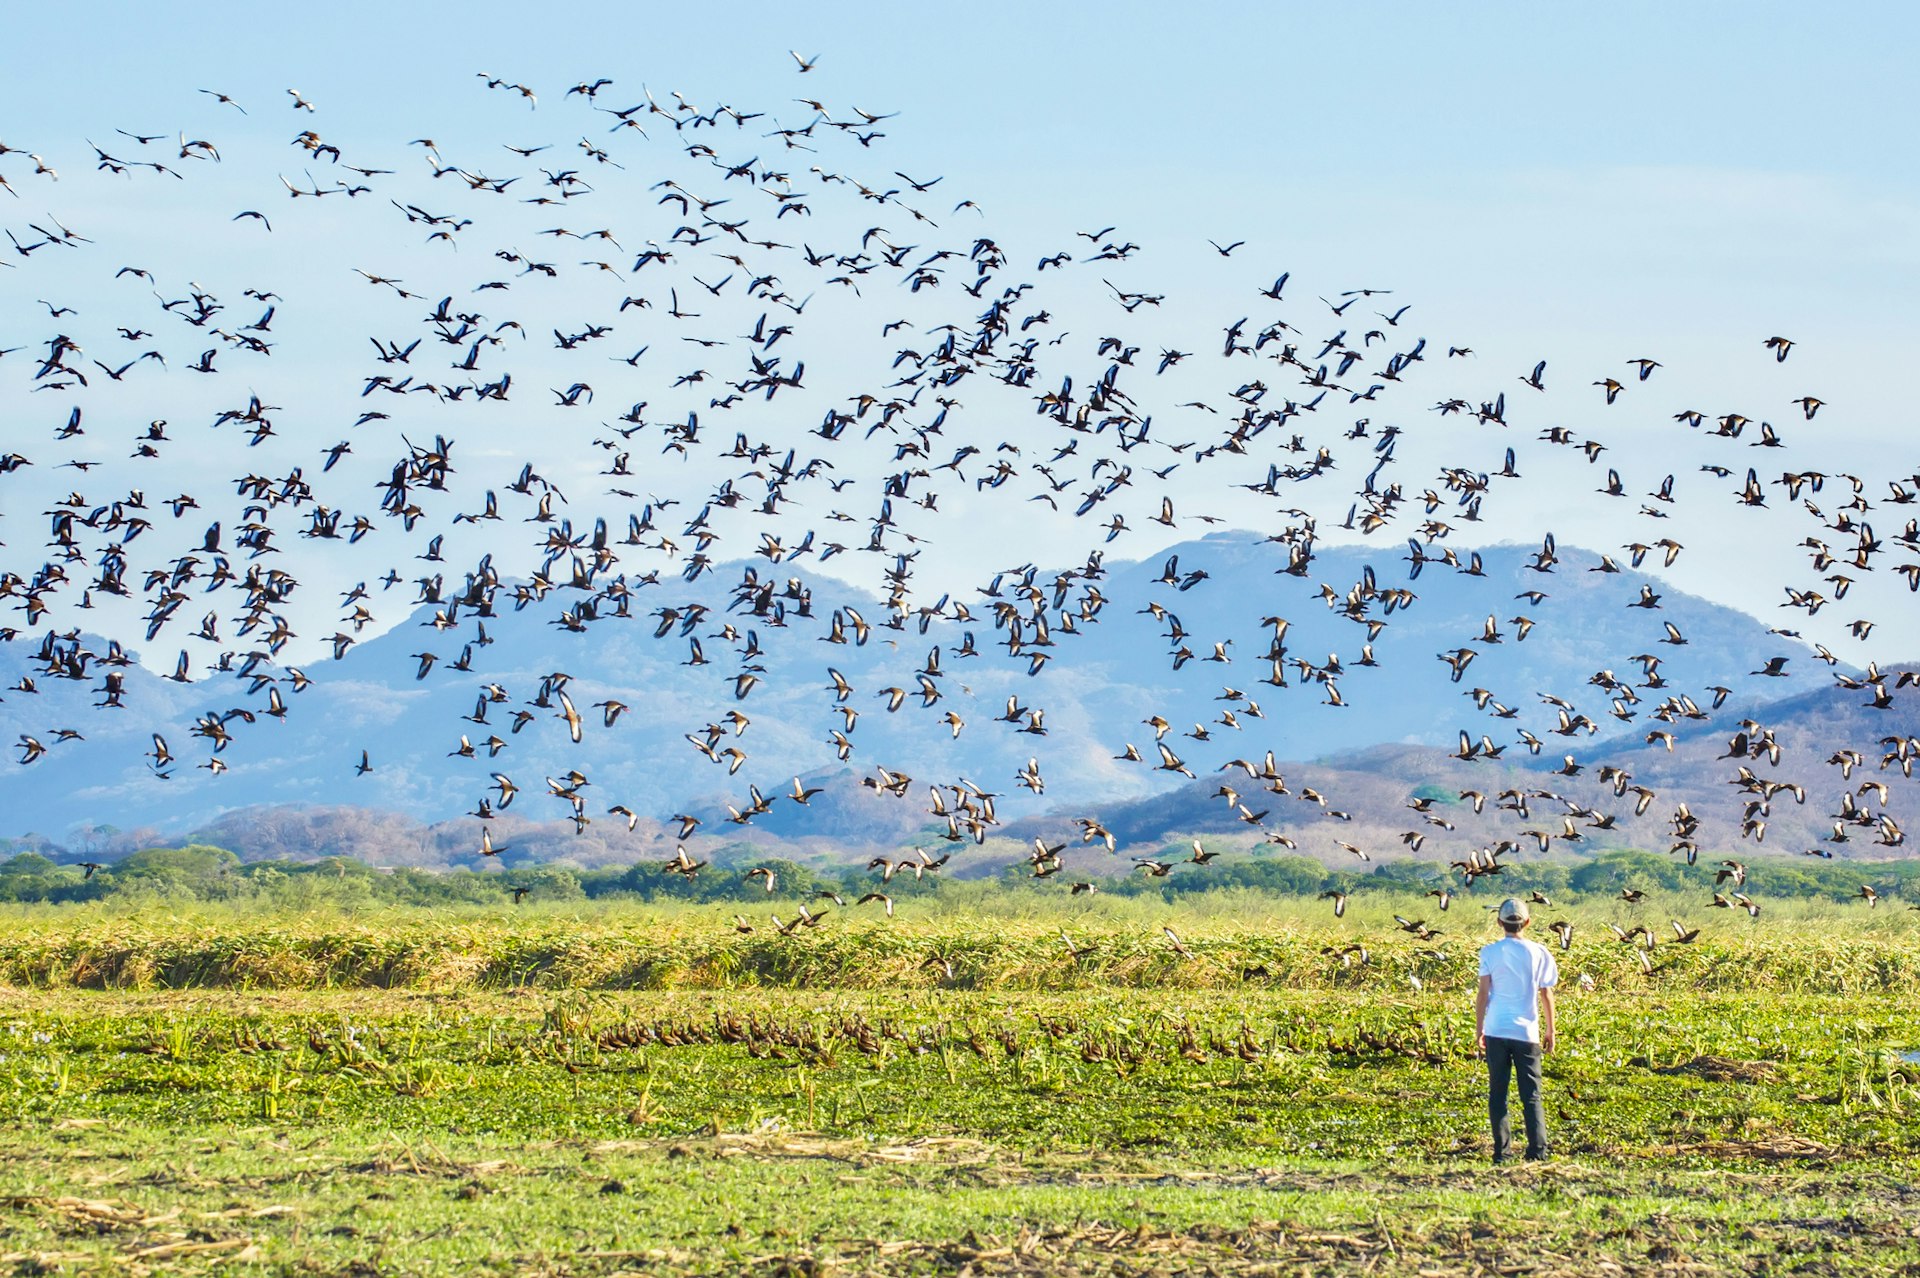 A teenager stands on the edge of a wetland as a huge flock of birds flies overhead